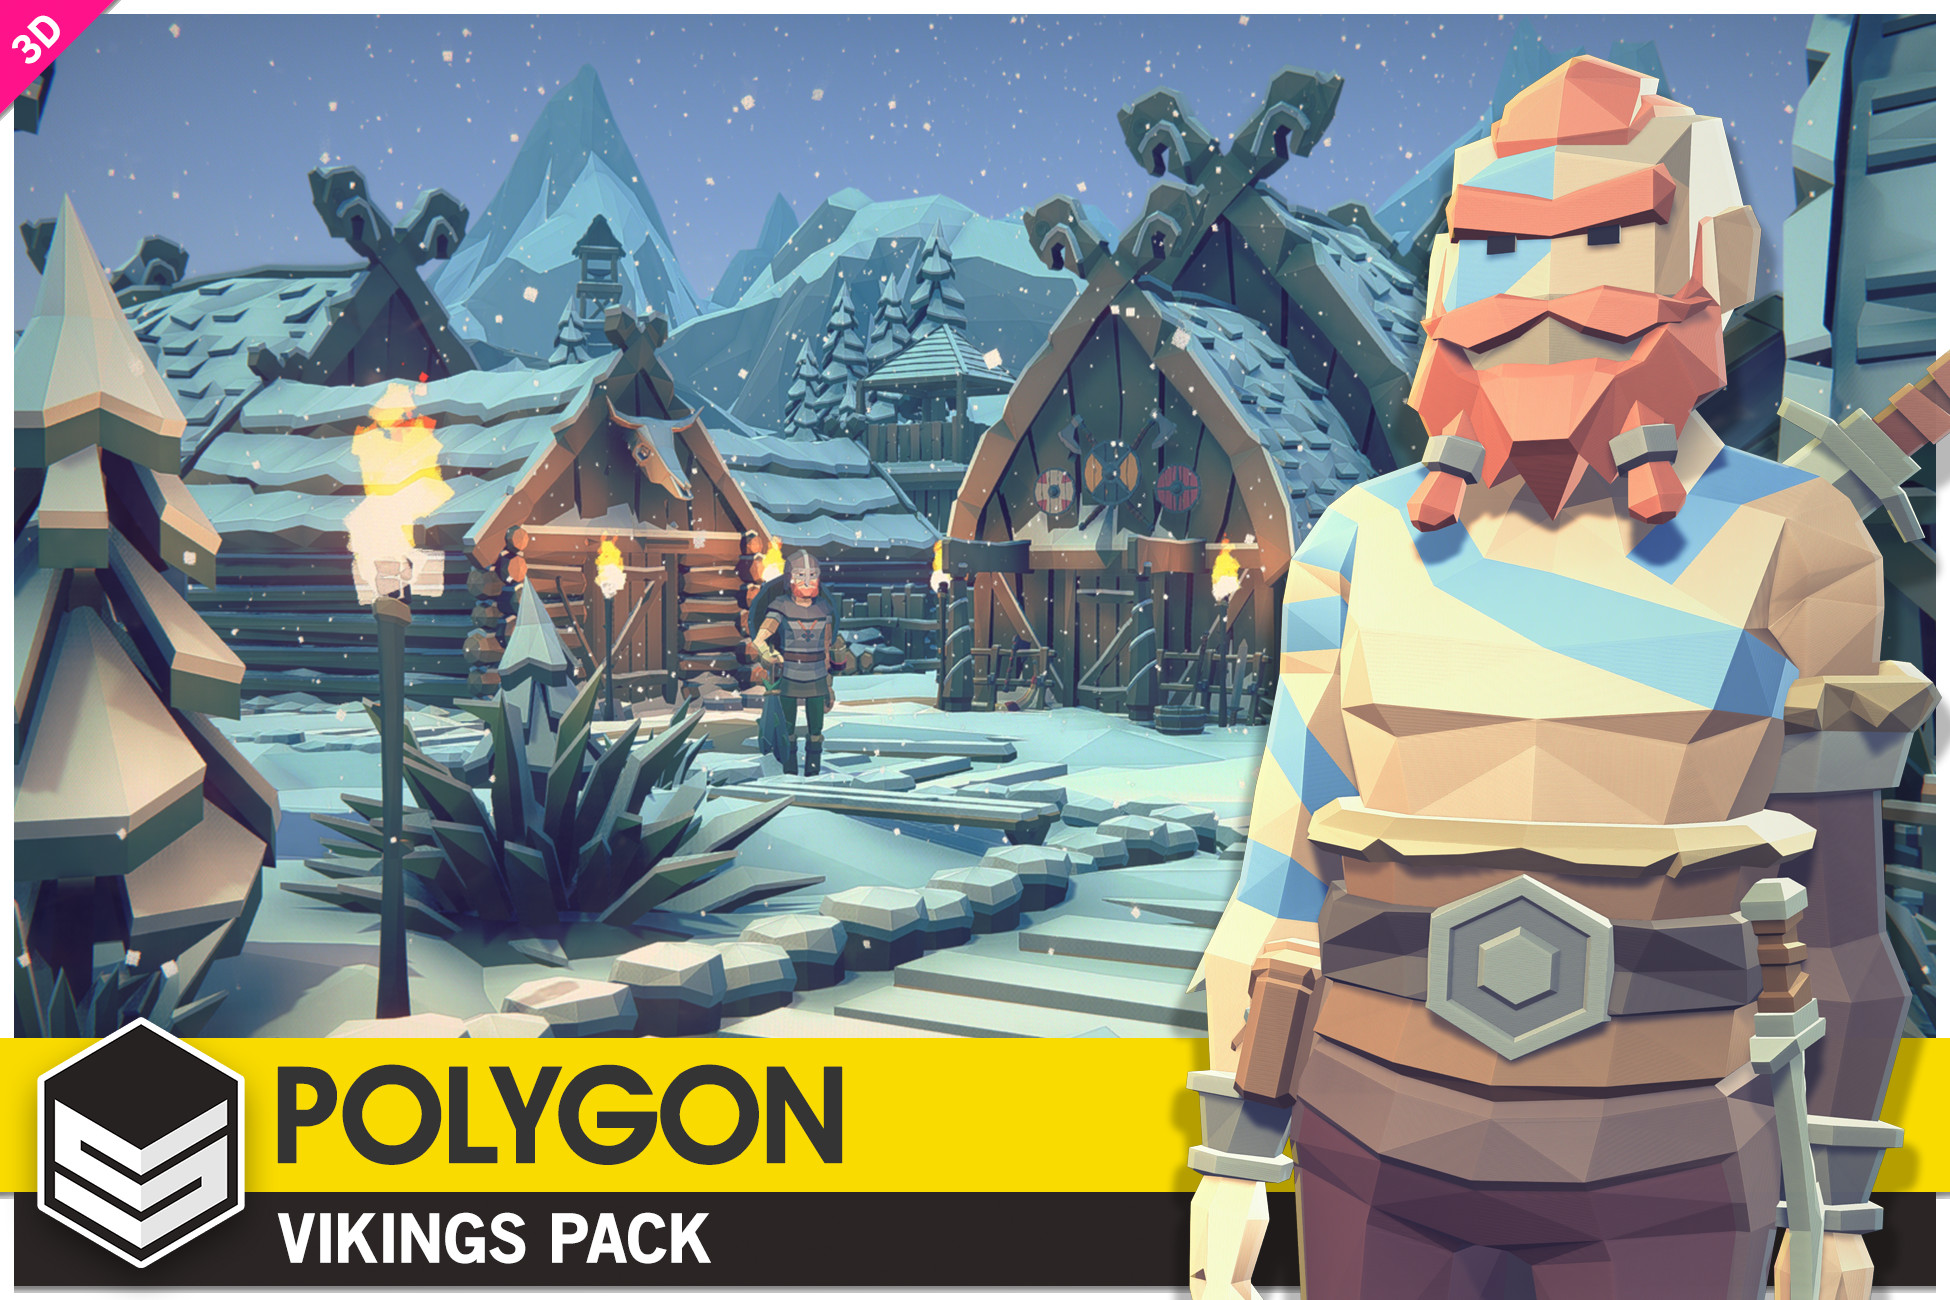 create your own Viking village with this great low poly asset pack